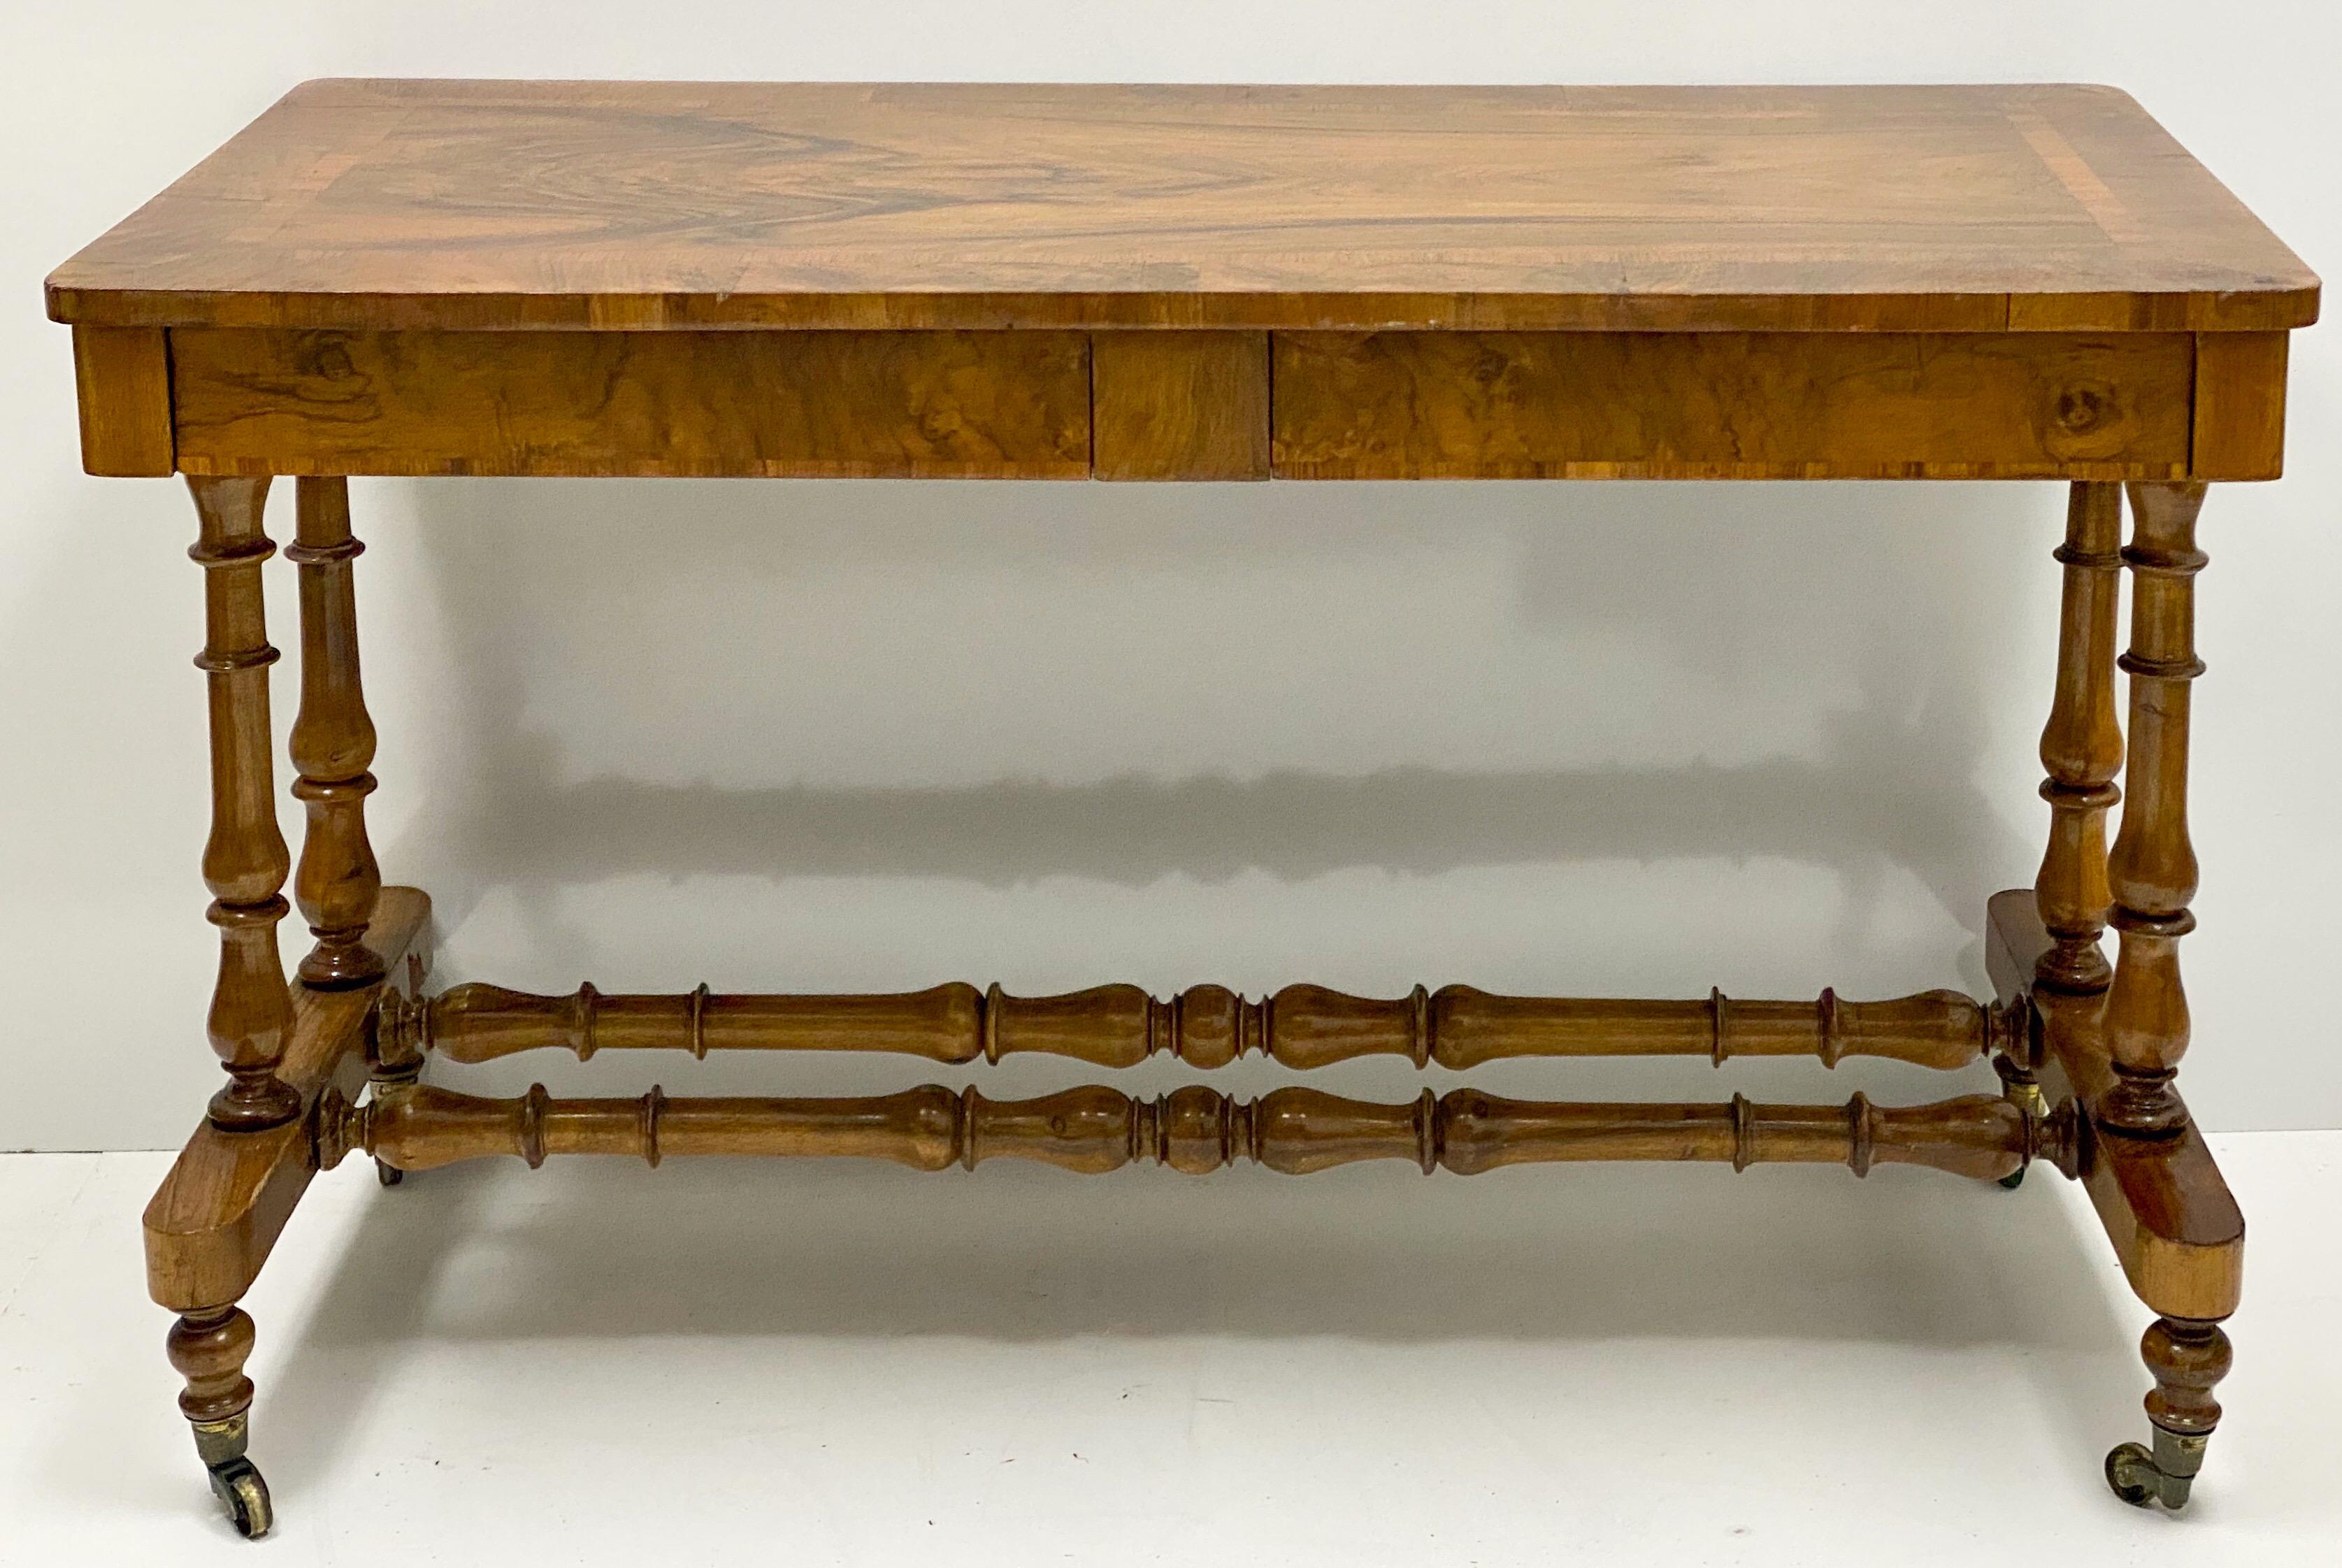 19th Century 19th-C. English Carved Walnut Turned Leg Writing Desk Or Console Table